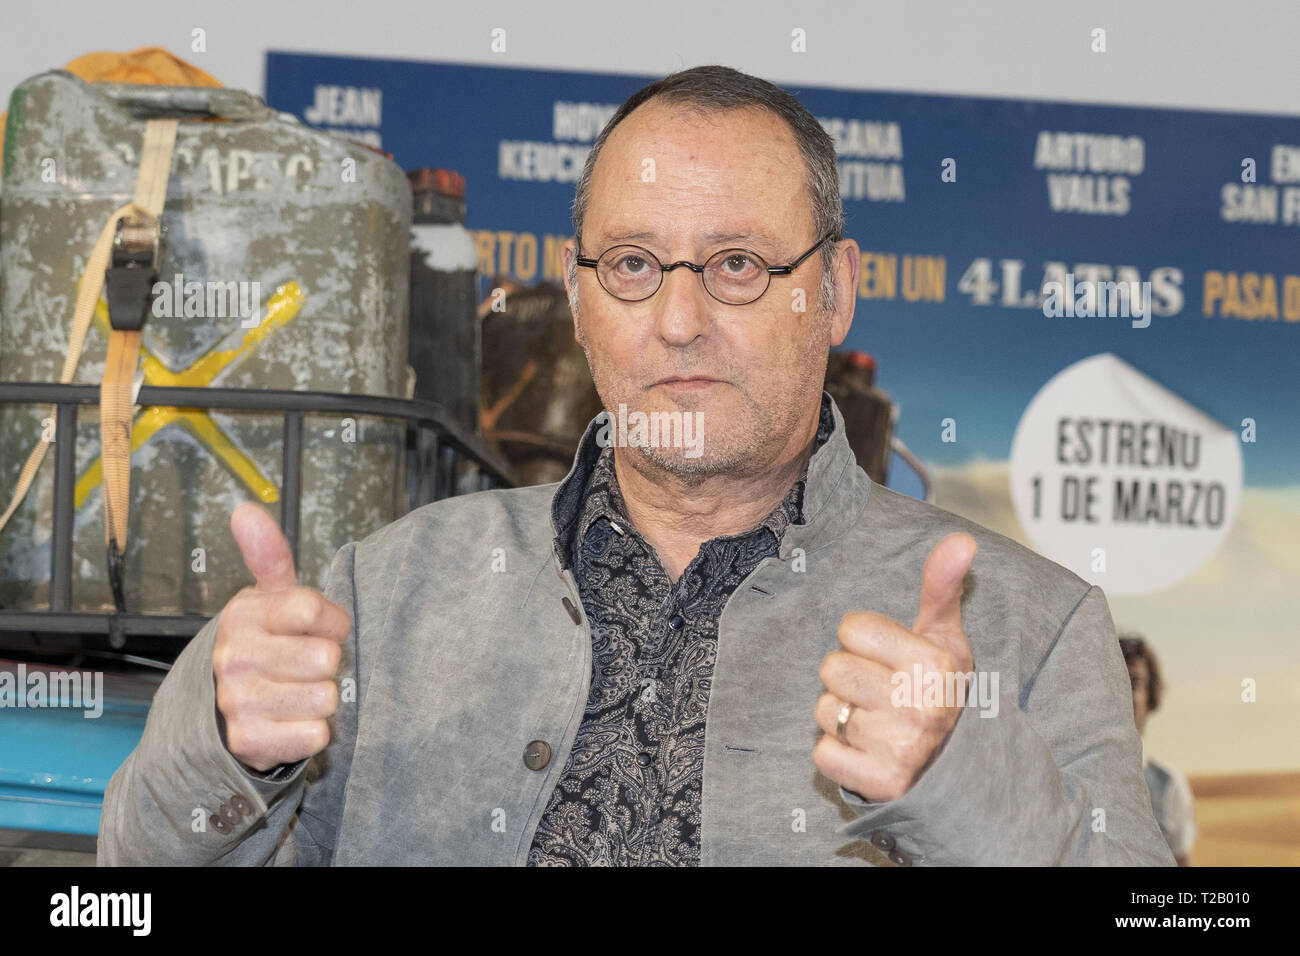 French actor Jean Reno attends the '4 Latas' premiere at Paz Cinema in  Madrid Featuring: Jean Reno Where: Madrid, Spain When: 28 Feb 2019 Credit:  Oscar Gonzalez/WENN.com Stock Photo - Alamy